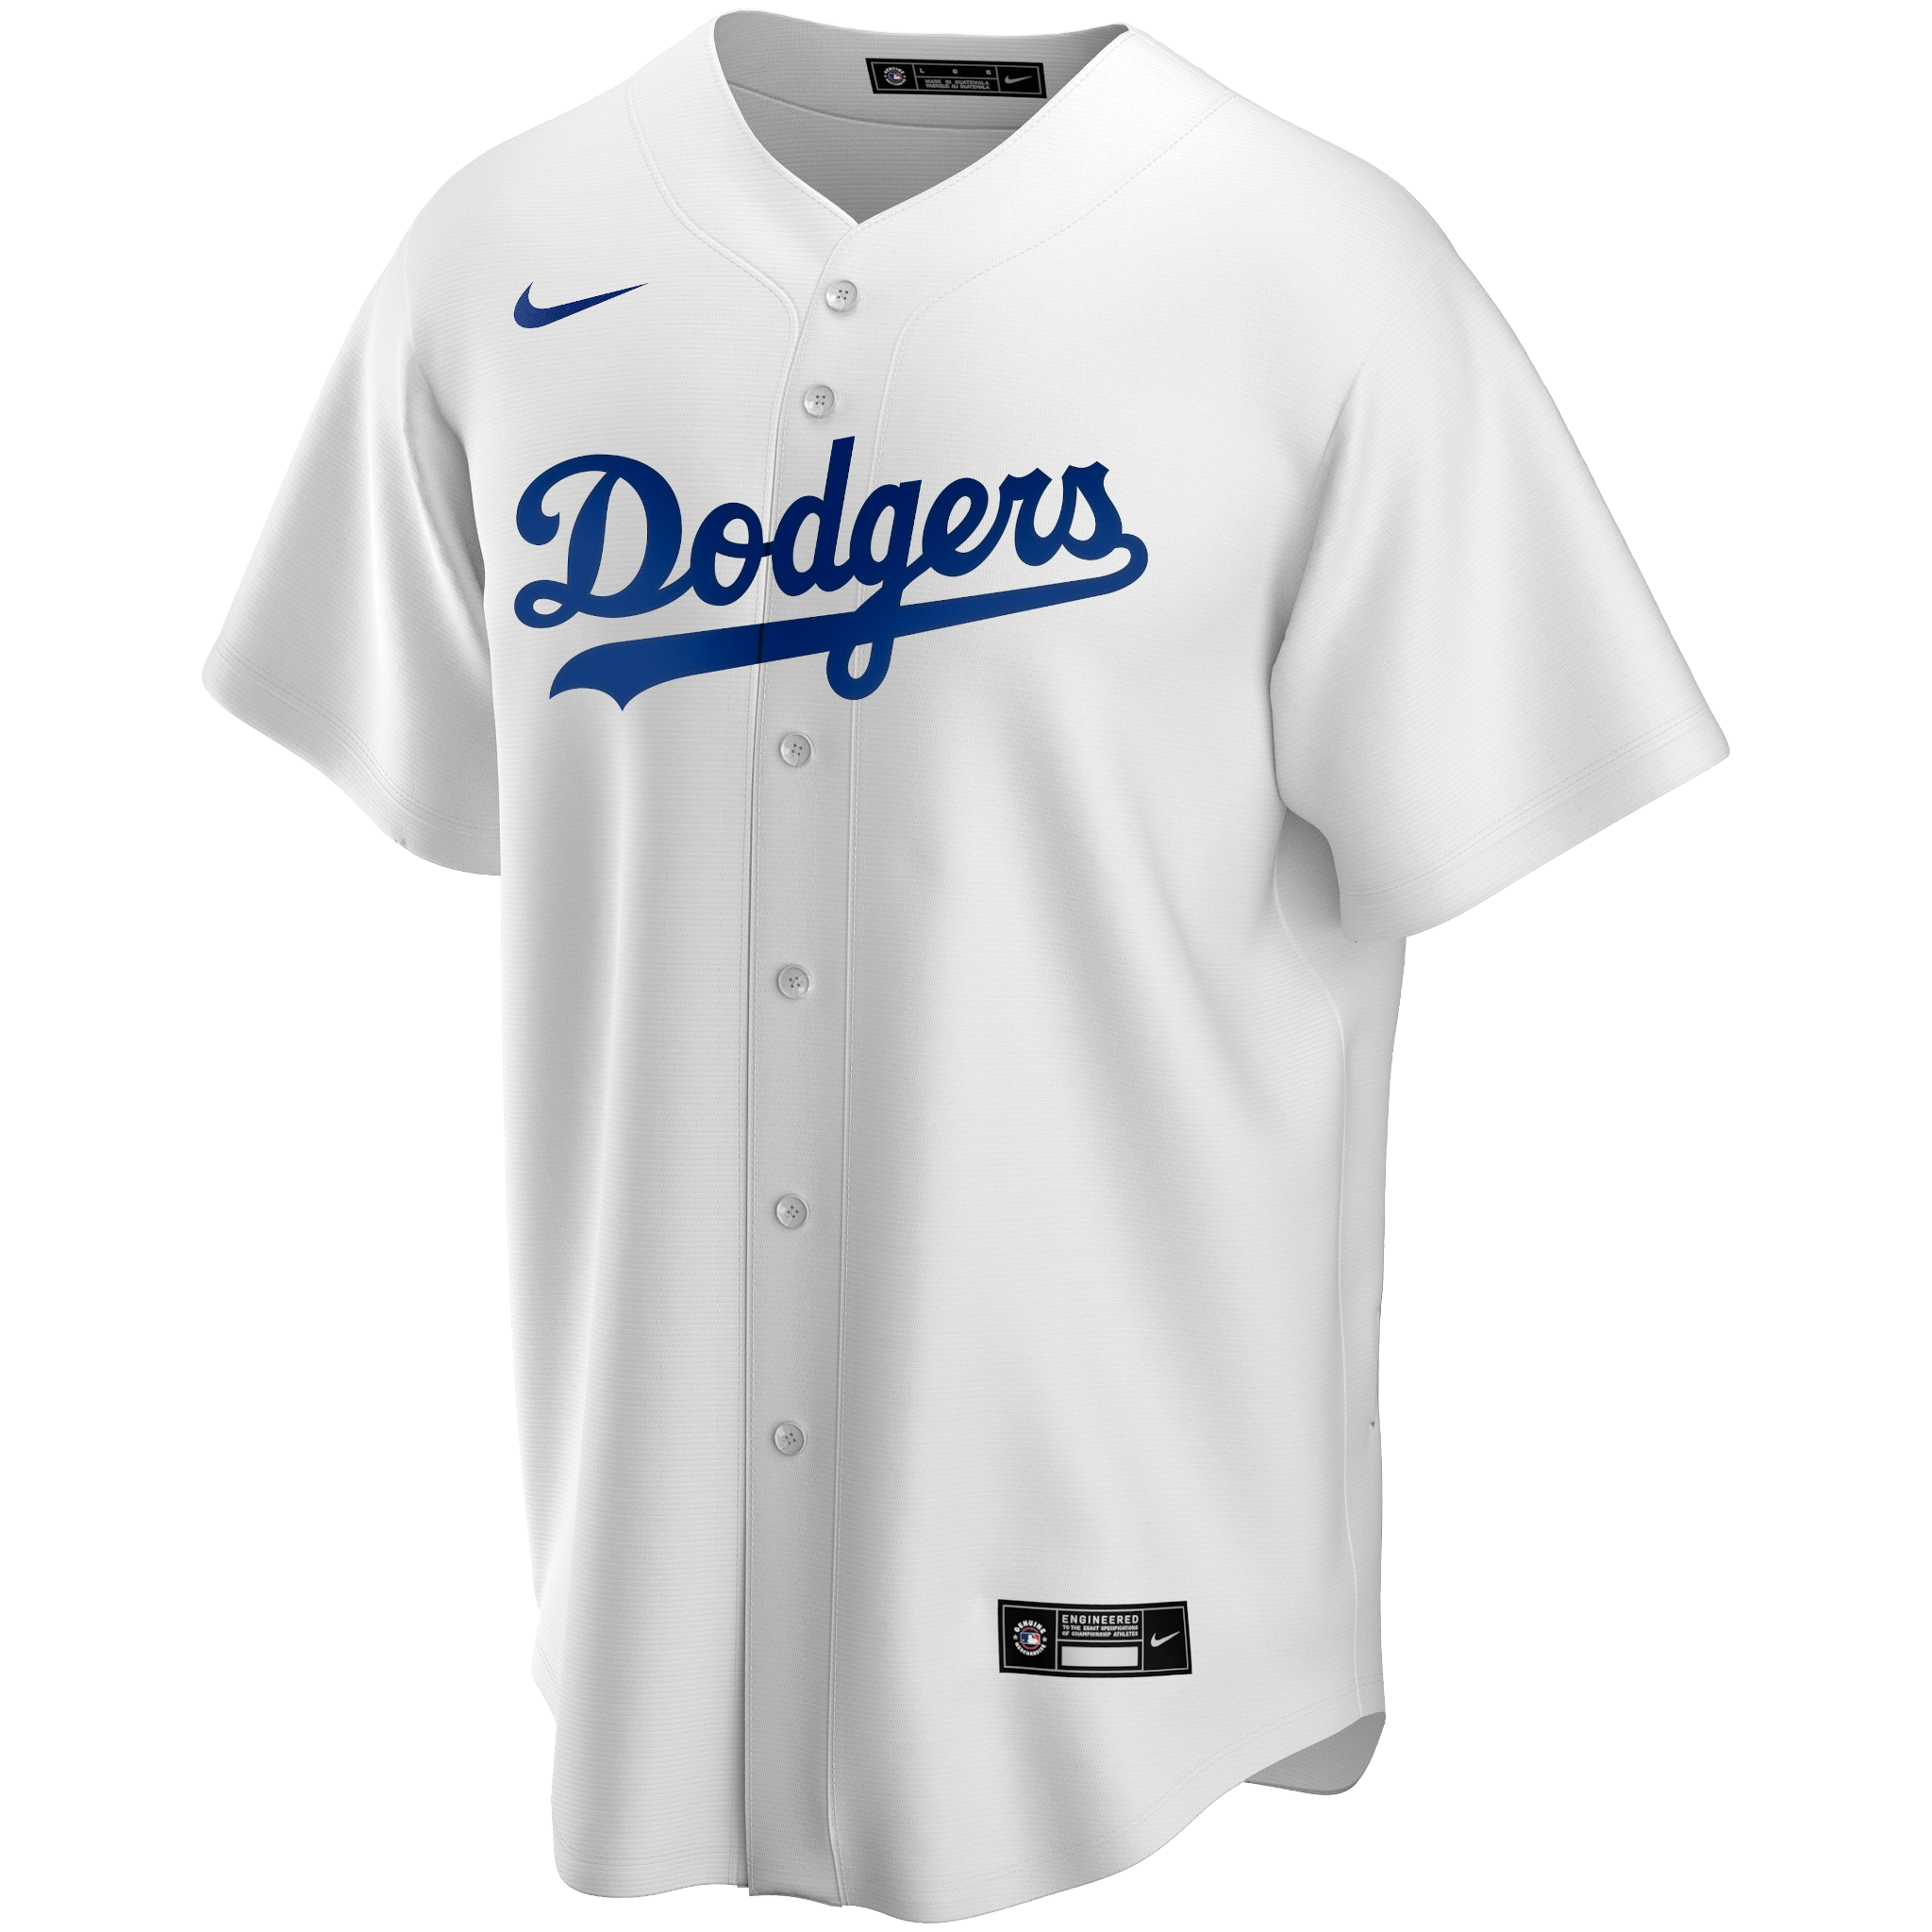 Dodgers Kershaw White Jersey Brand New for Sale in Anaheim, CA - OfferUp